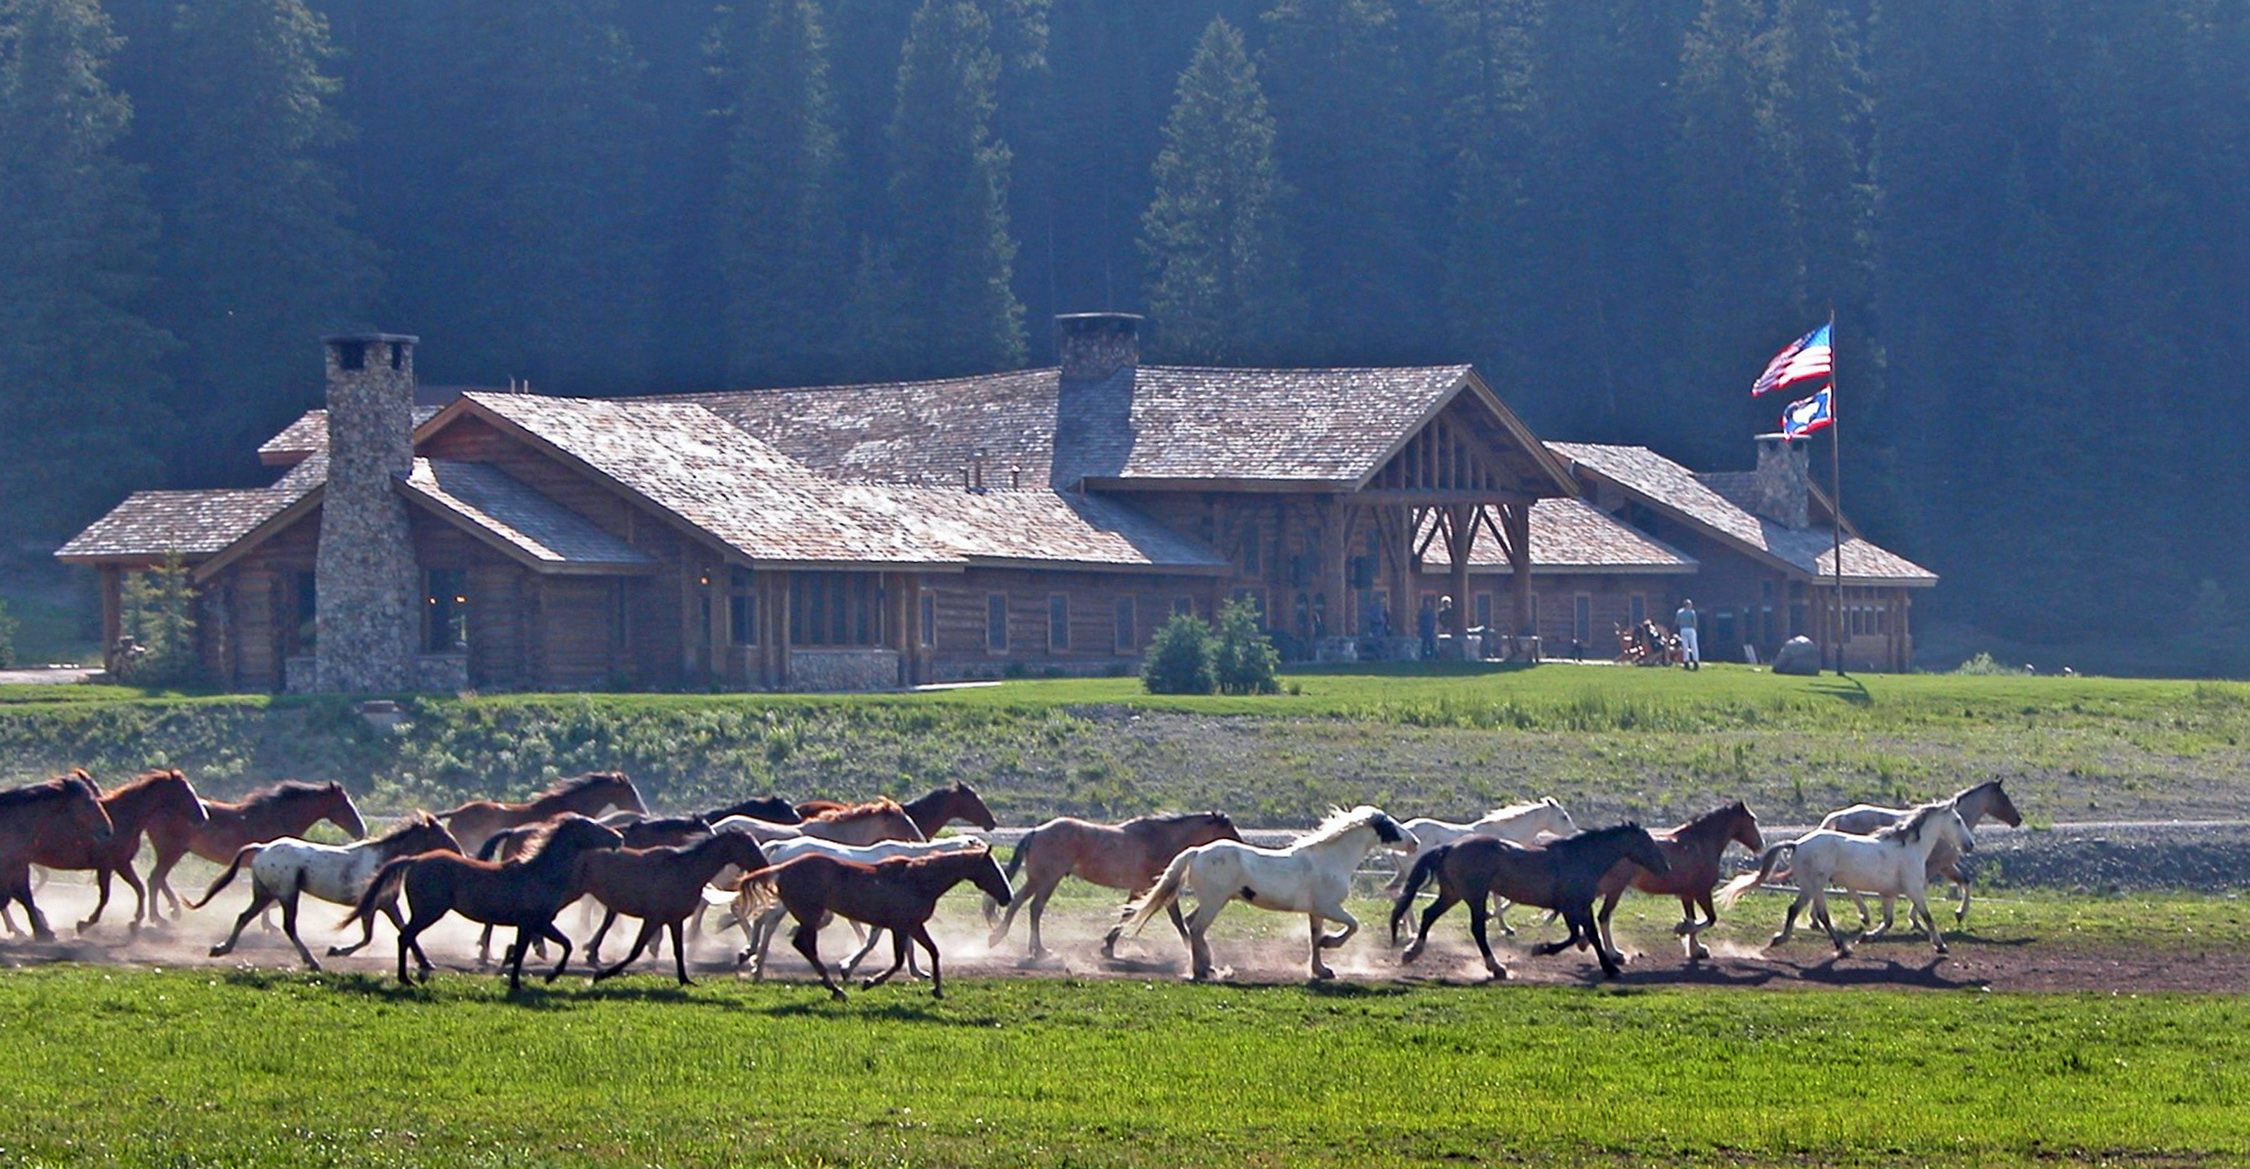 At the end of every day in the summer at Brooks Lake Lodge, the beloved horses are released to gallop out to pasture, creating a beautiful experience for guests to enjoy.